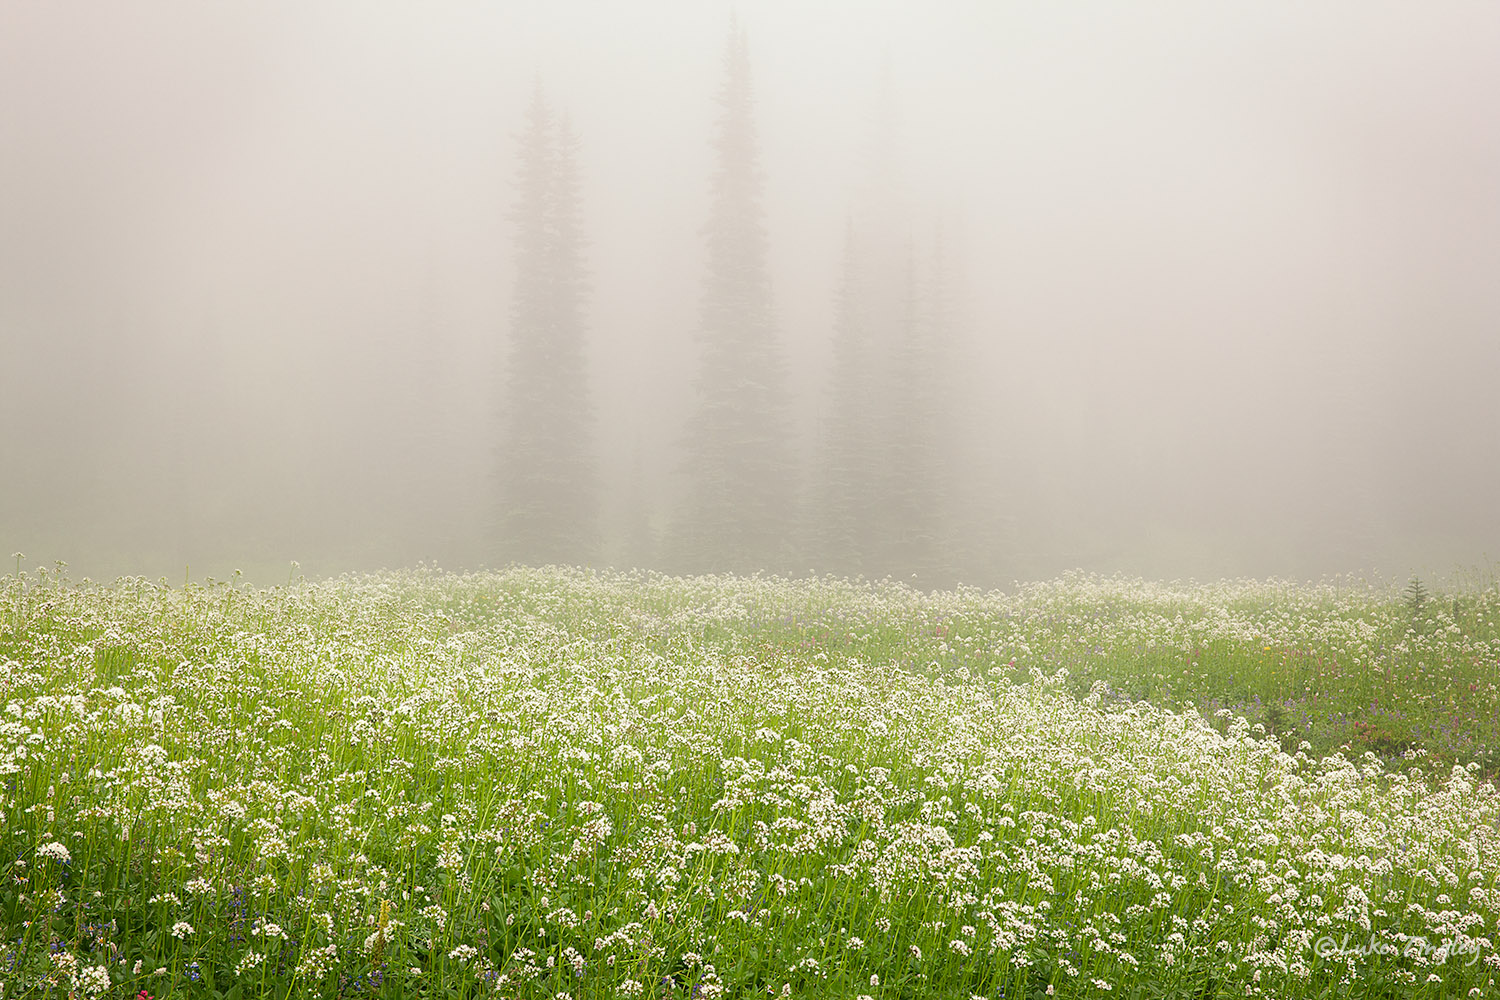 Dense fog engulfs the wildflower meadows and forests along the Wonderland trail in the backcountry of Mt Rainier National Park...